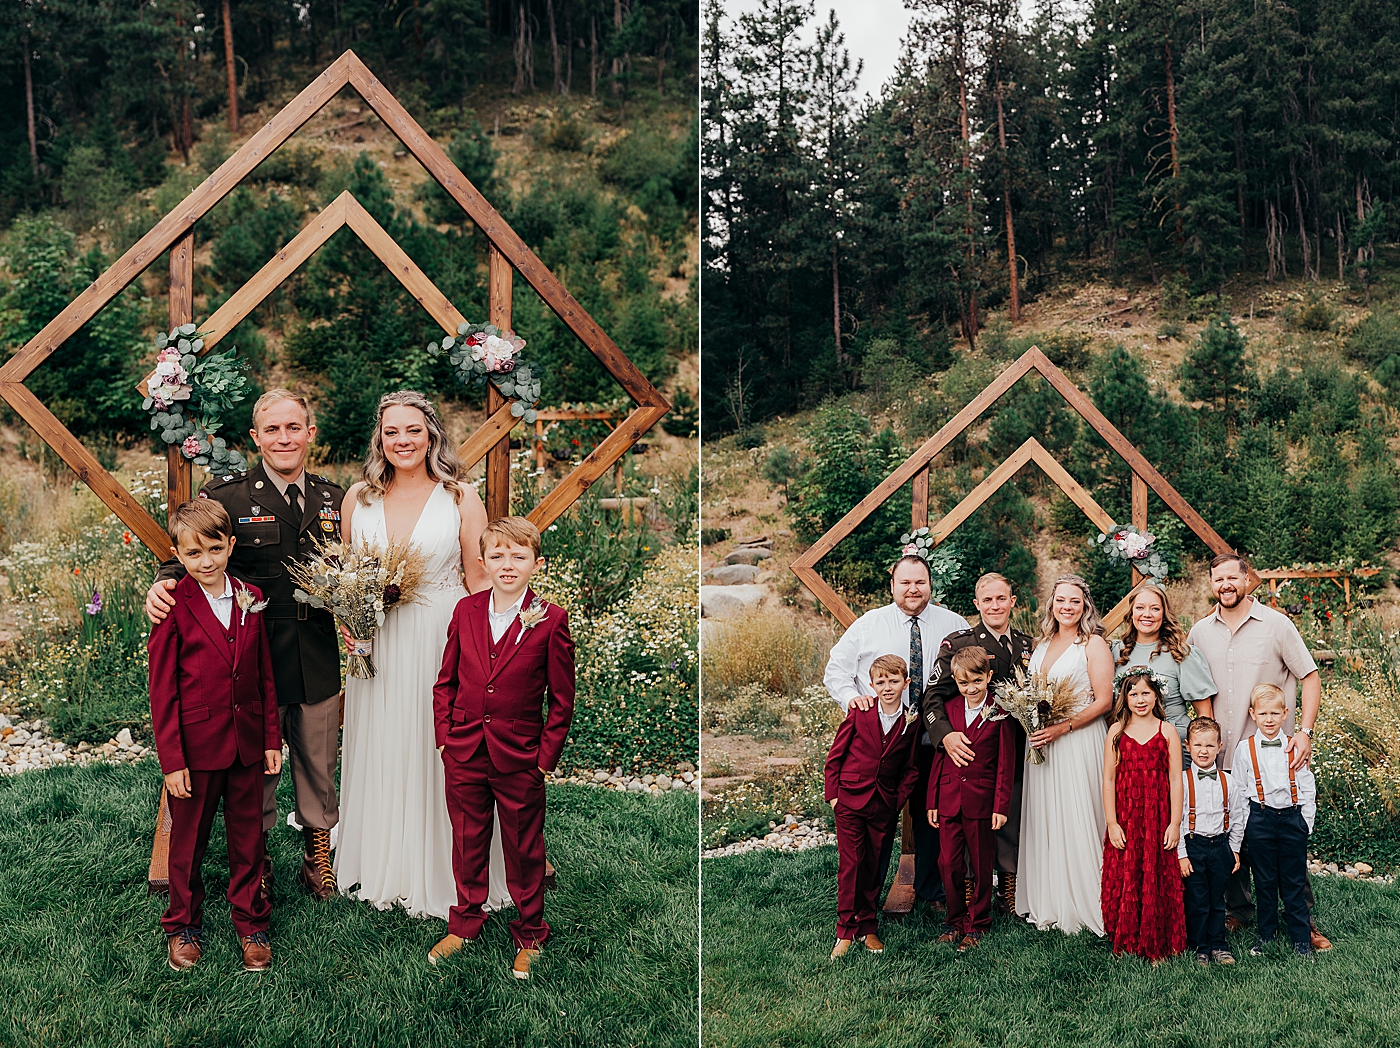 Family portraits after elopement ceremony. Photo by Megan Montalvo Photography.